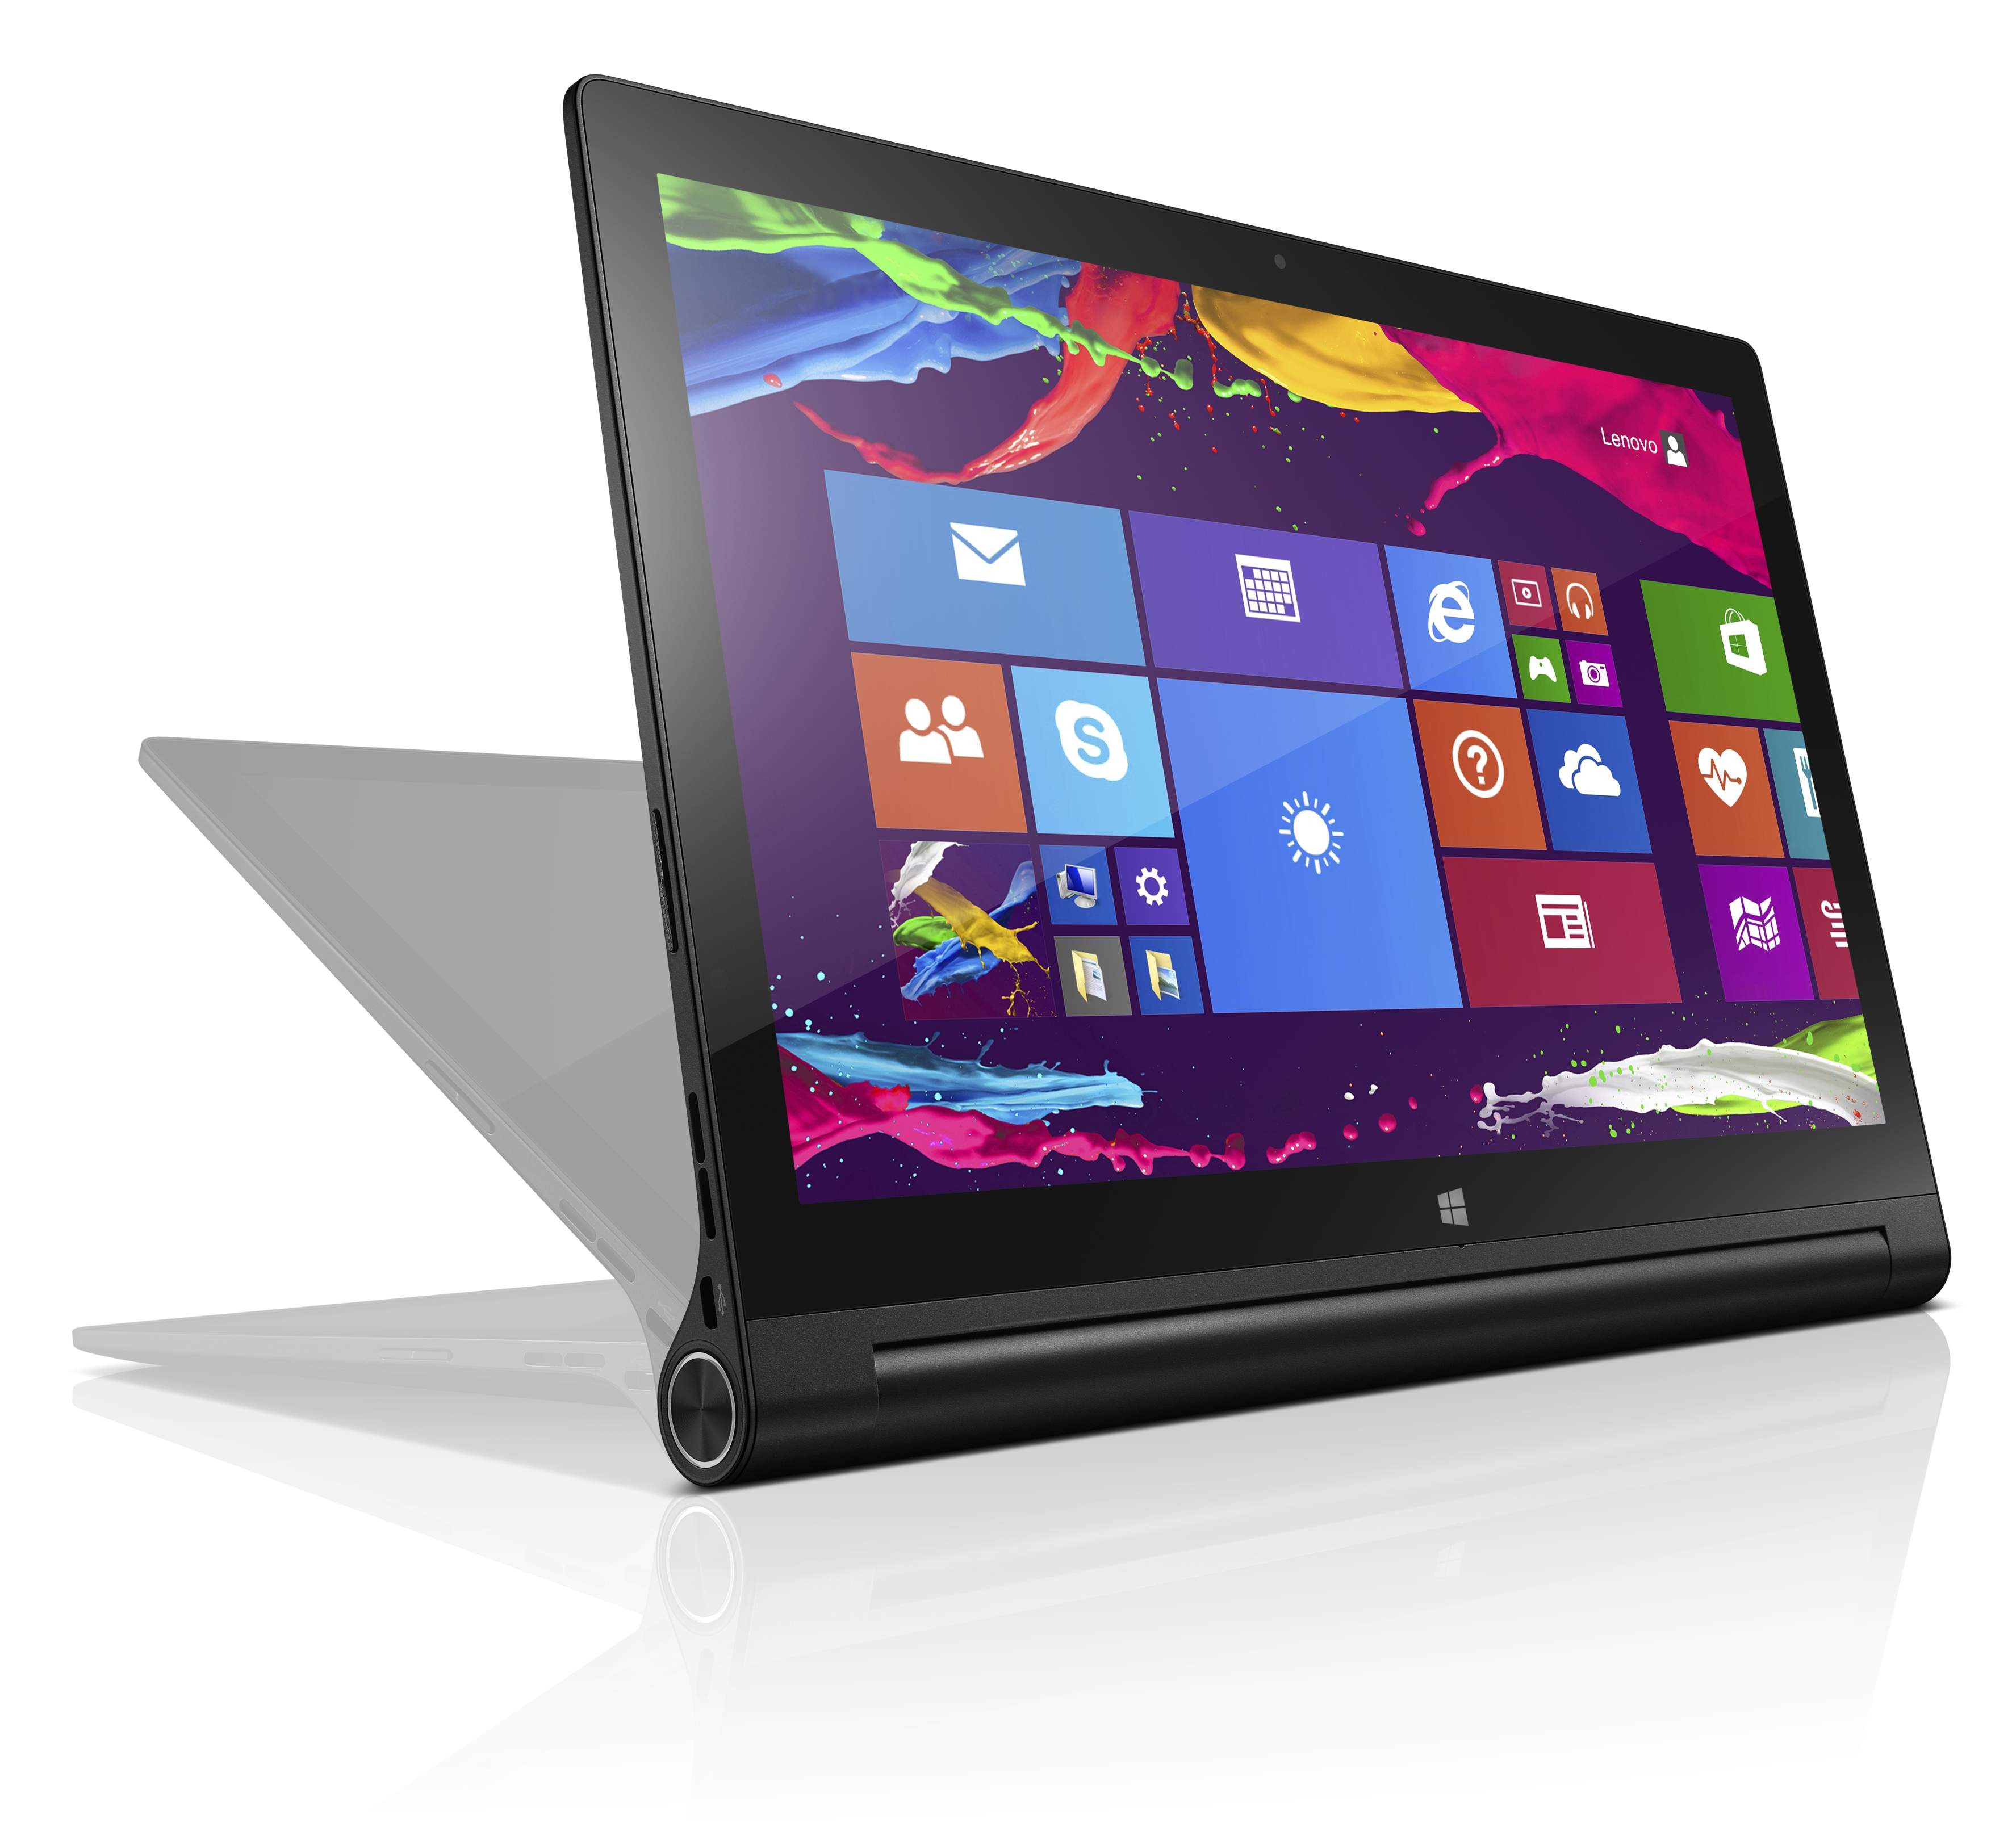  Lenovo  unveils the 13  inch  Yoga  Tablet 2 with Windows